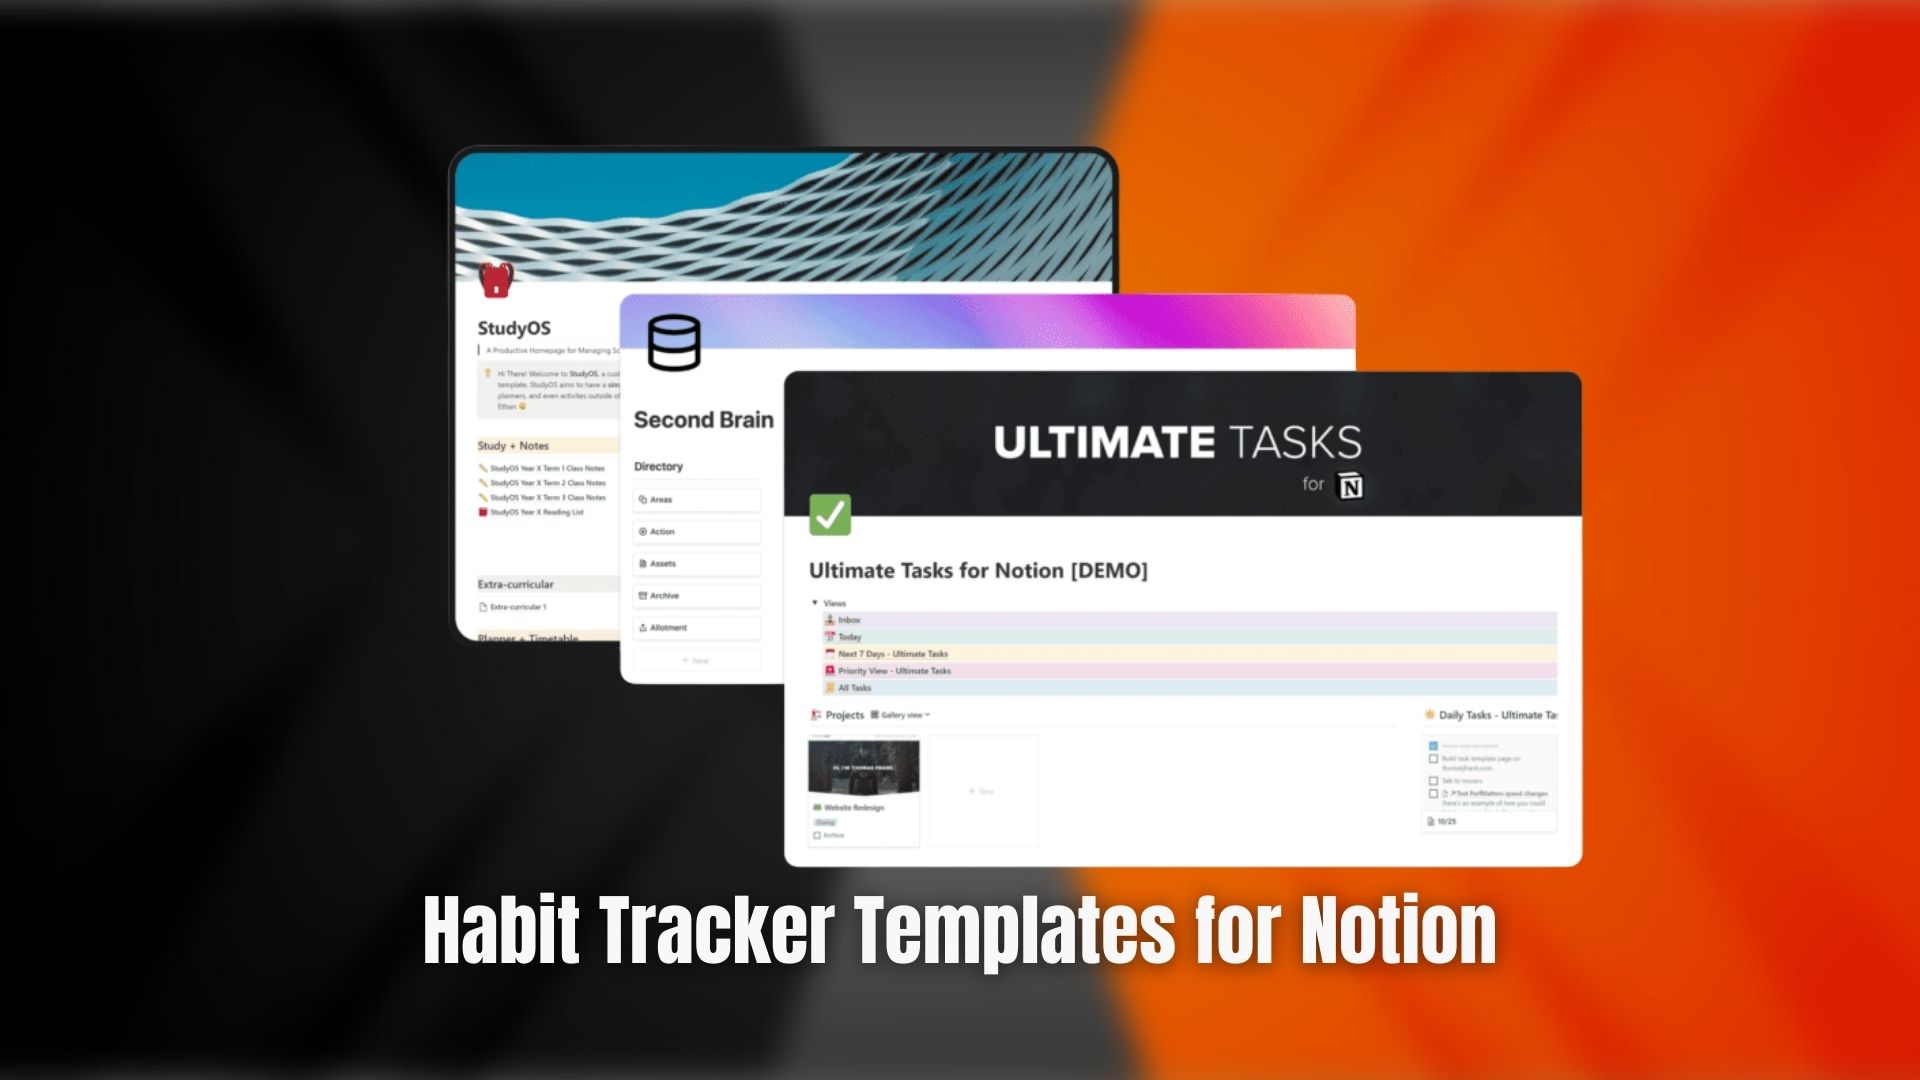 Habit Tracker Templates for Notion